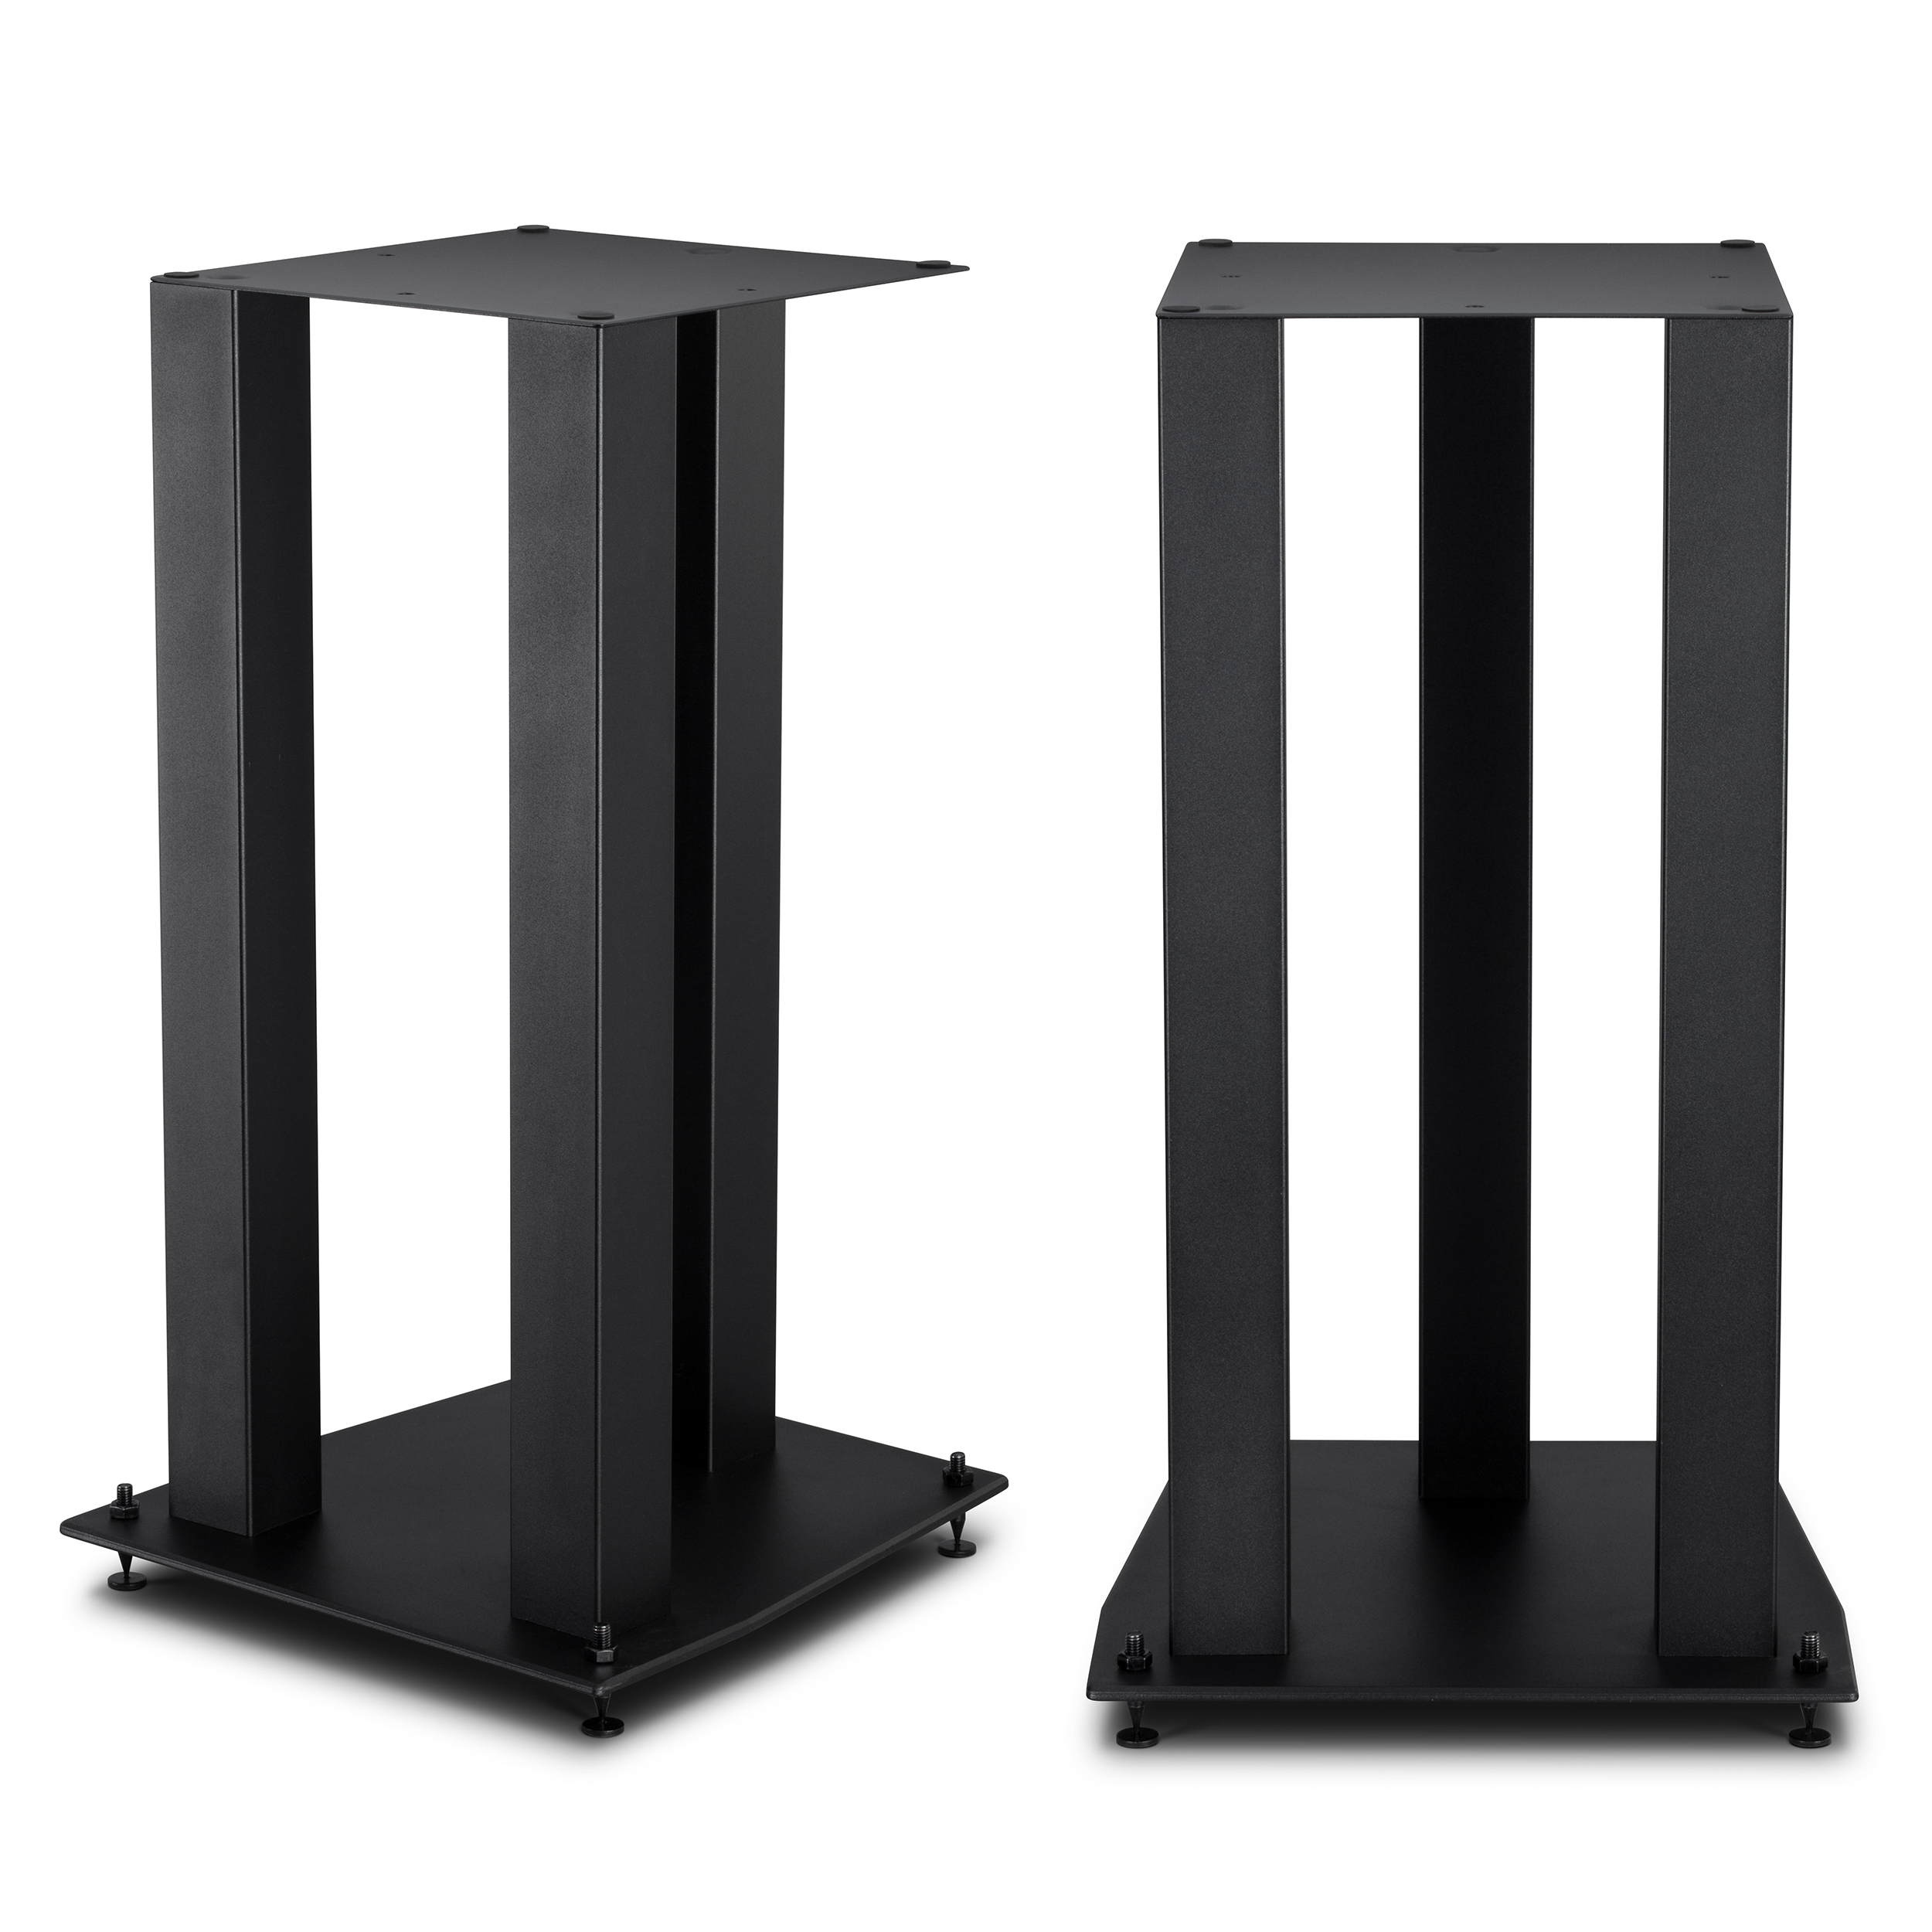 MoFi Electronics SourcePoint 8 Speaker Stands [Pair]